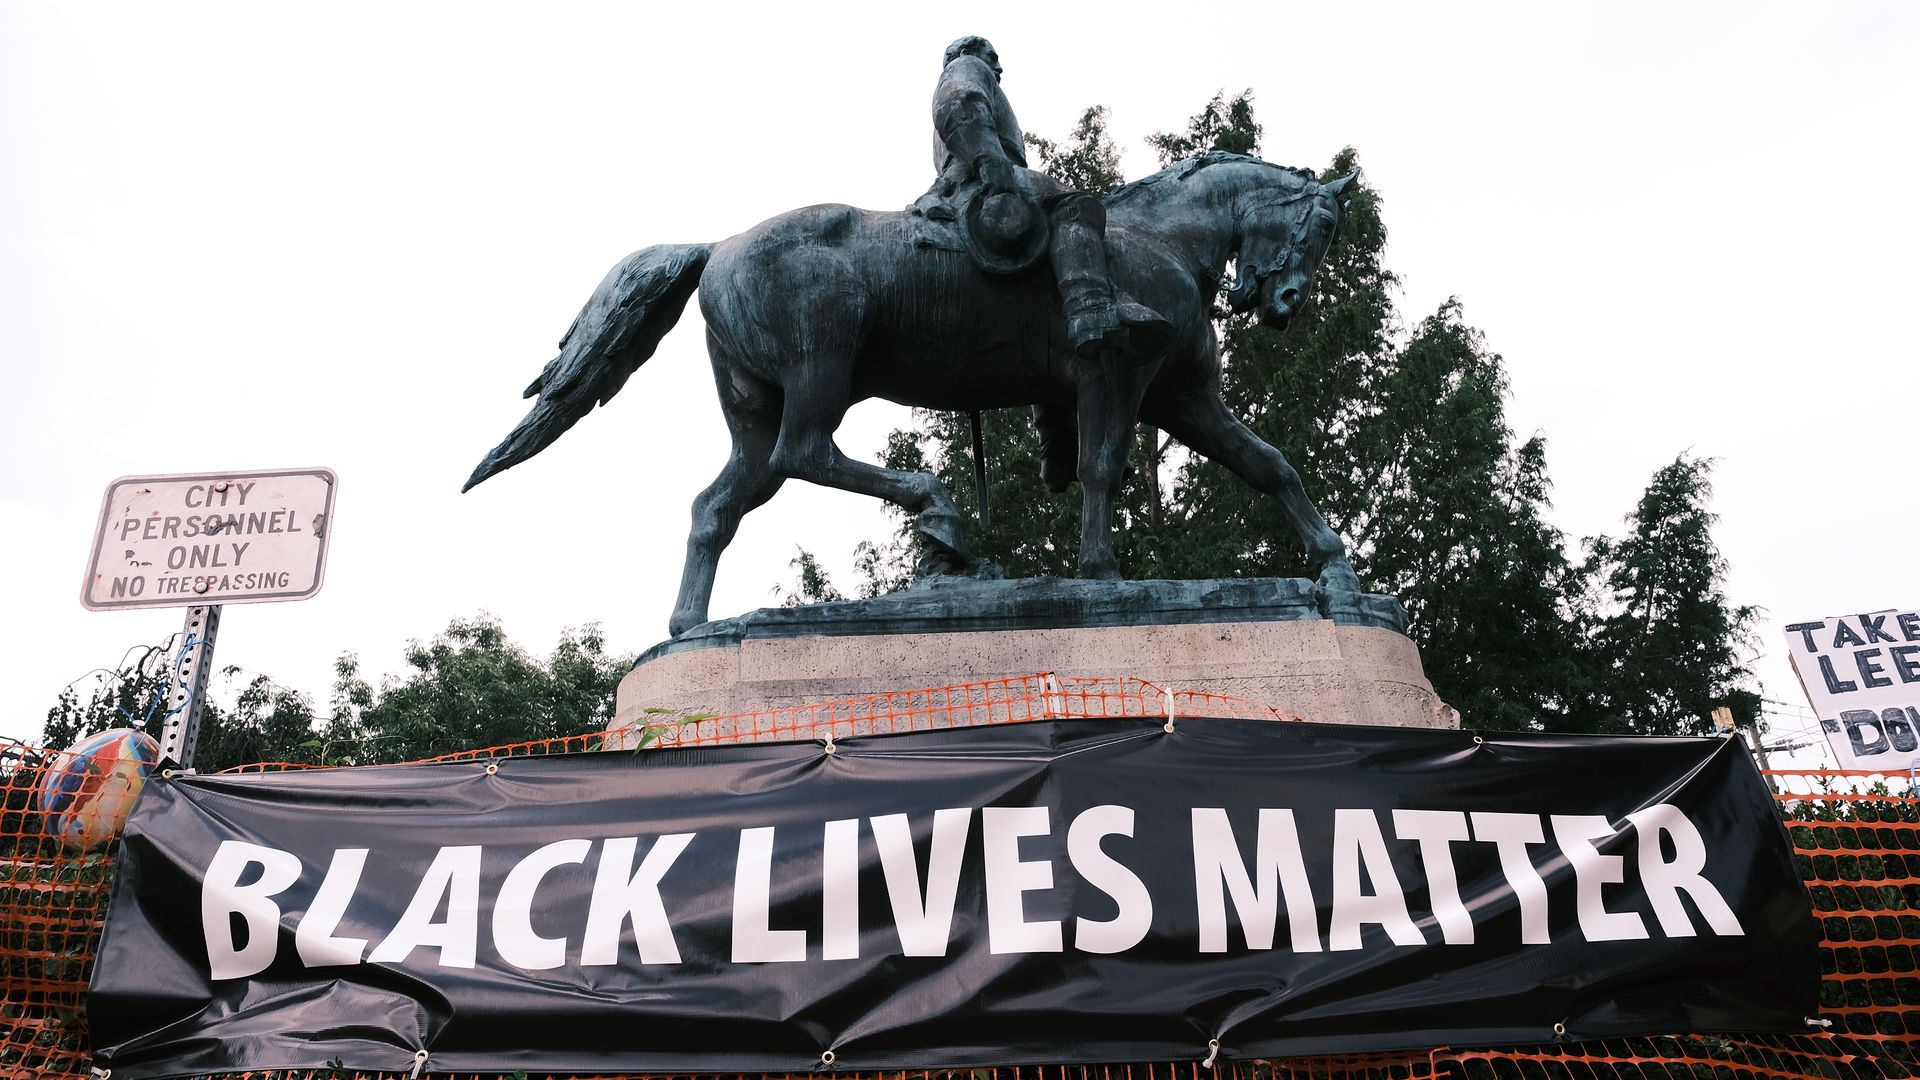 The statue of Robert E. Lee in Charlottesville, Virginia with a banner that reads "Black Lives Matter"